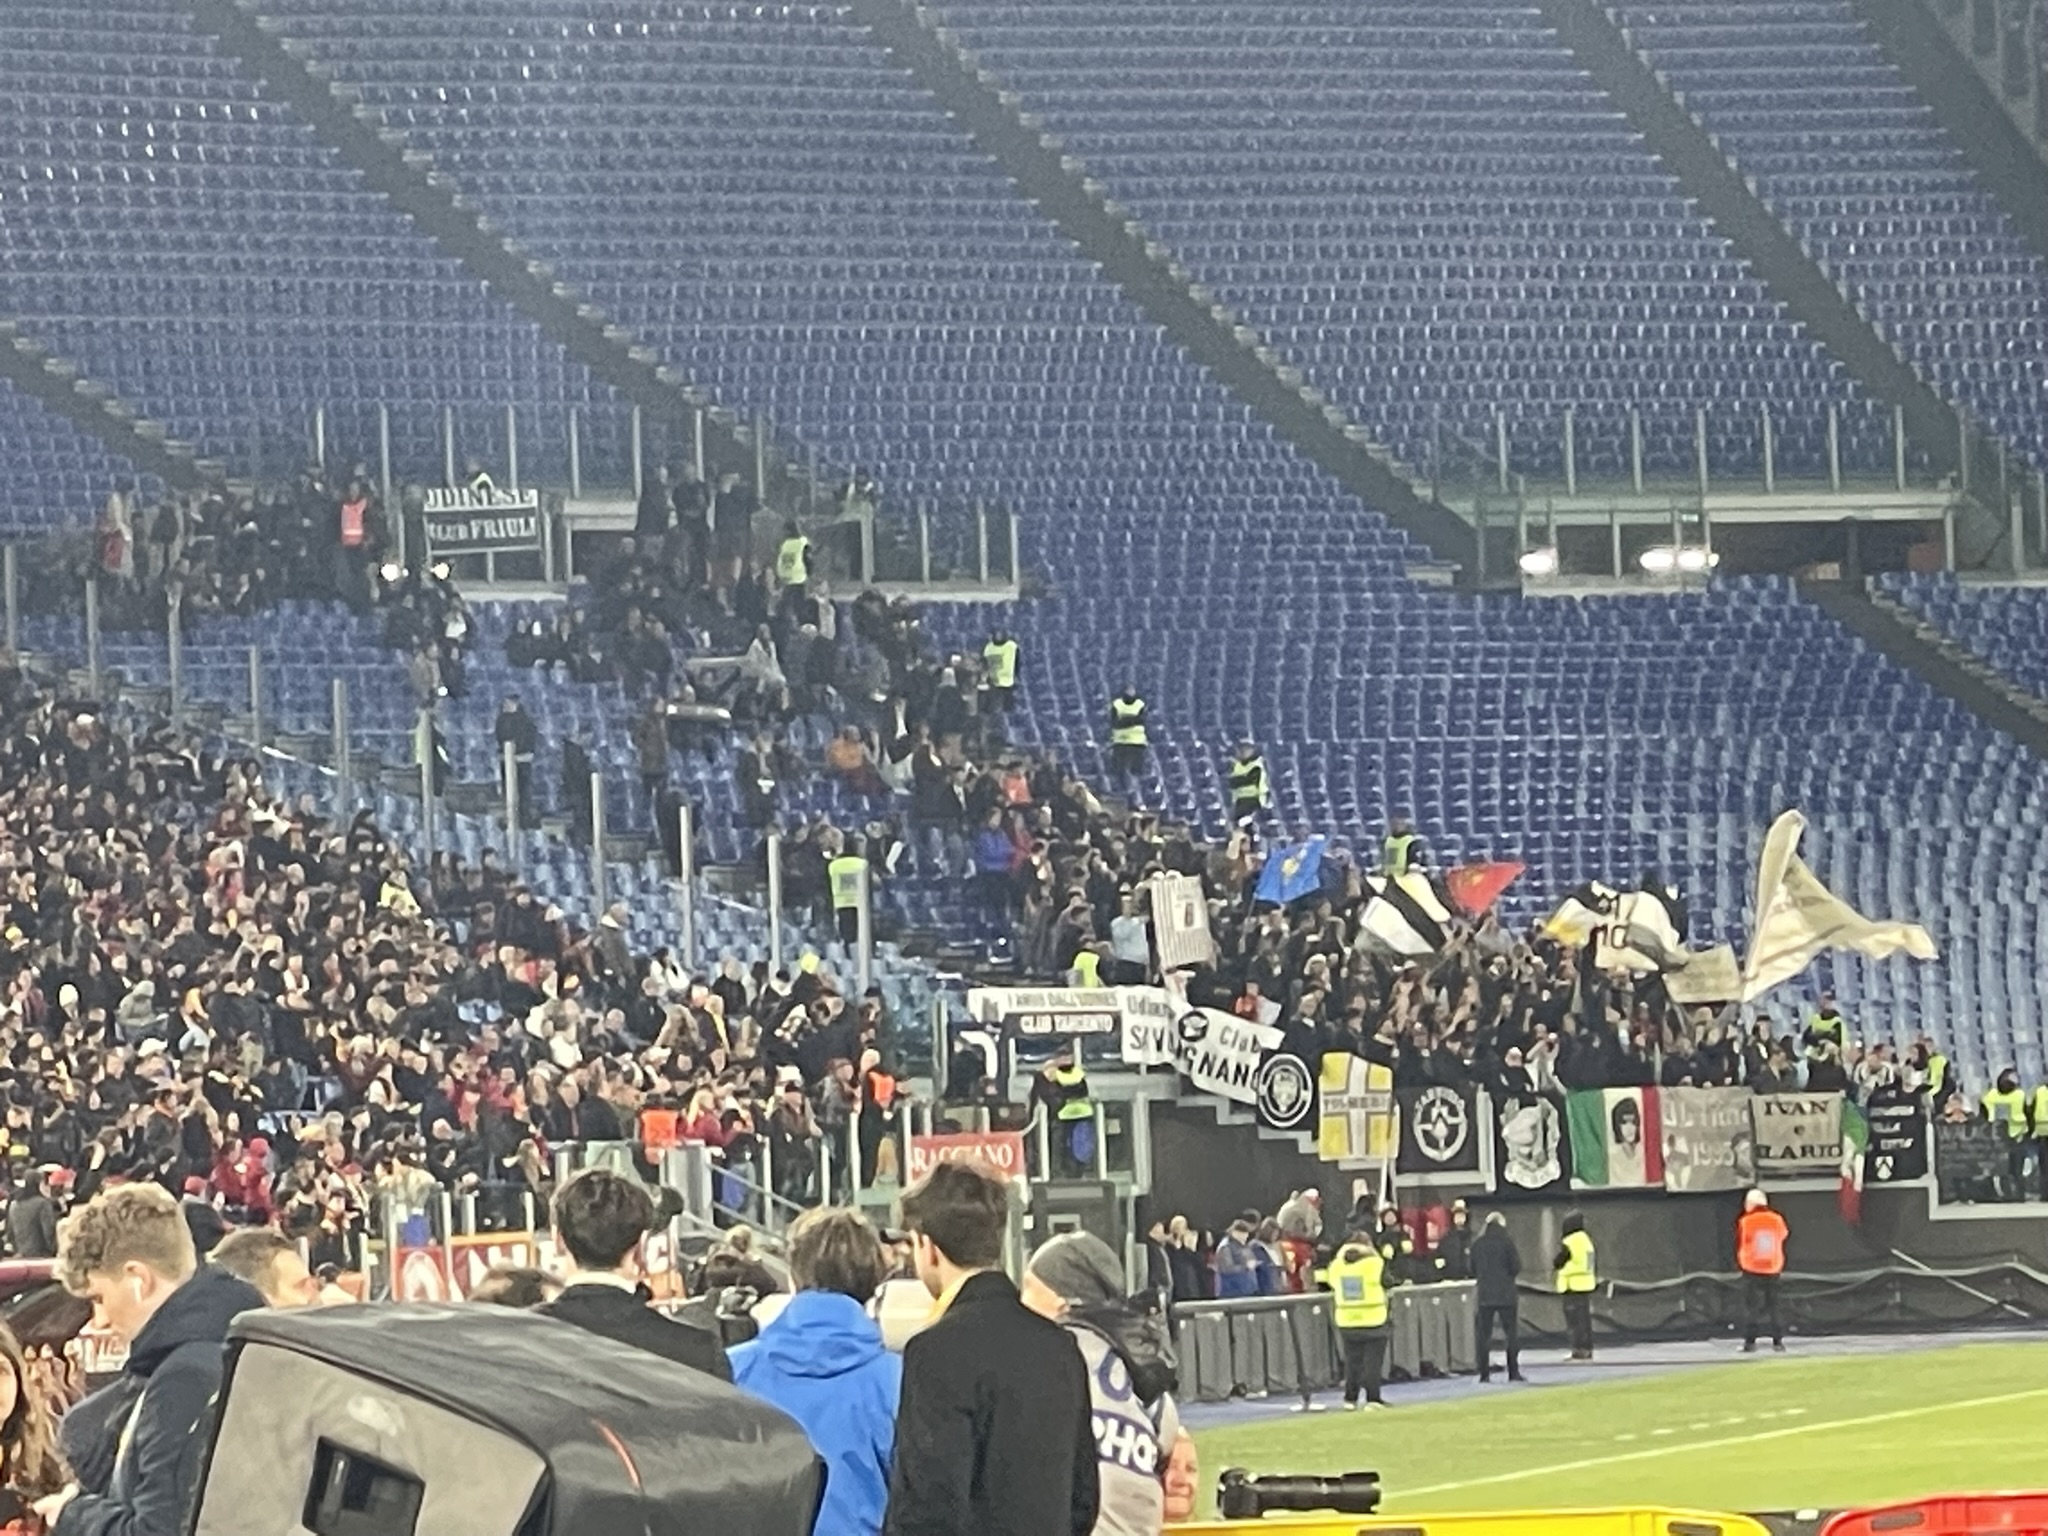 Tifosi dell'Udinese